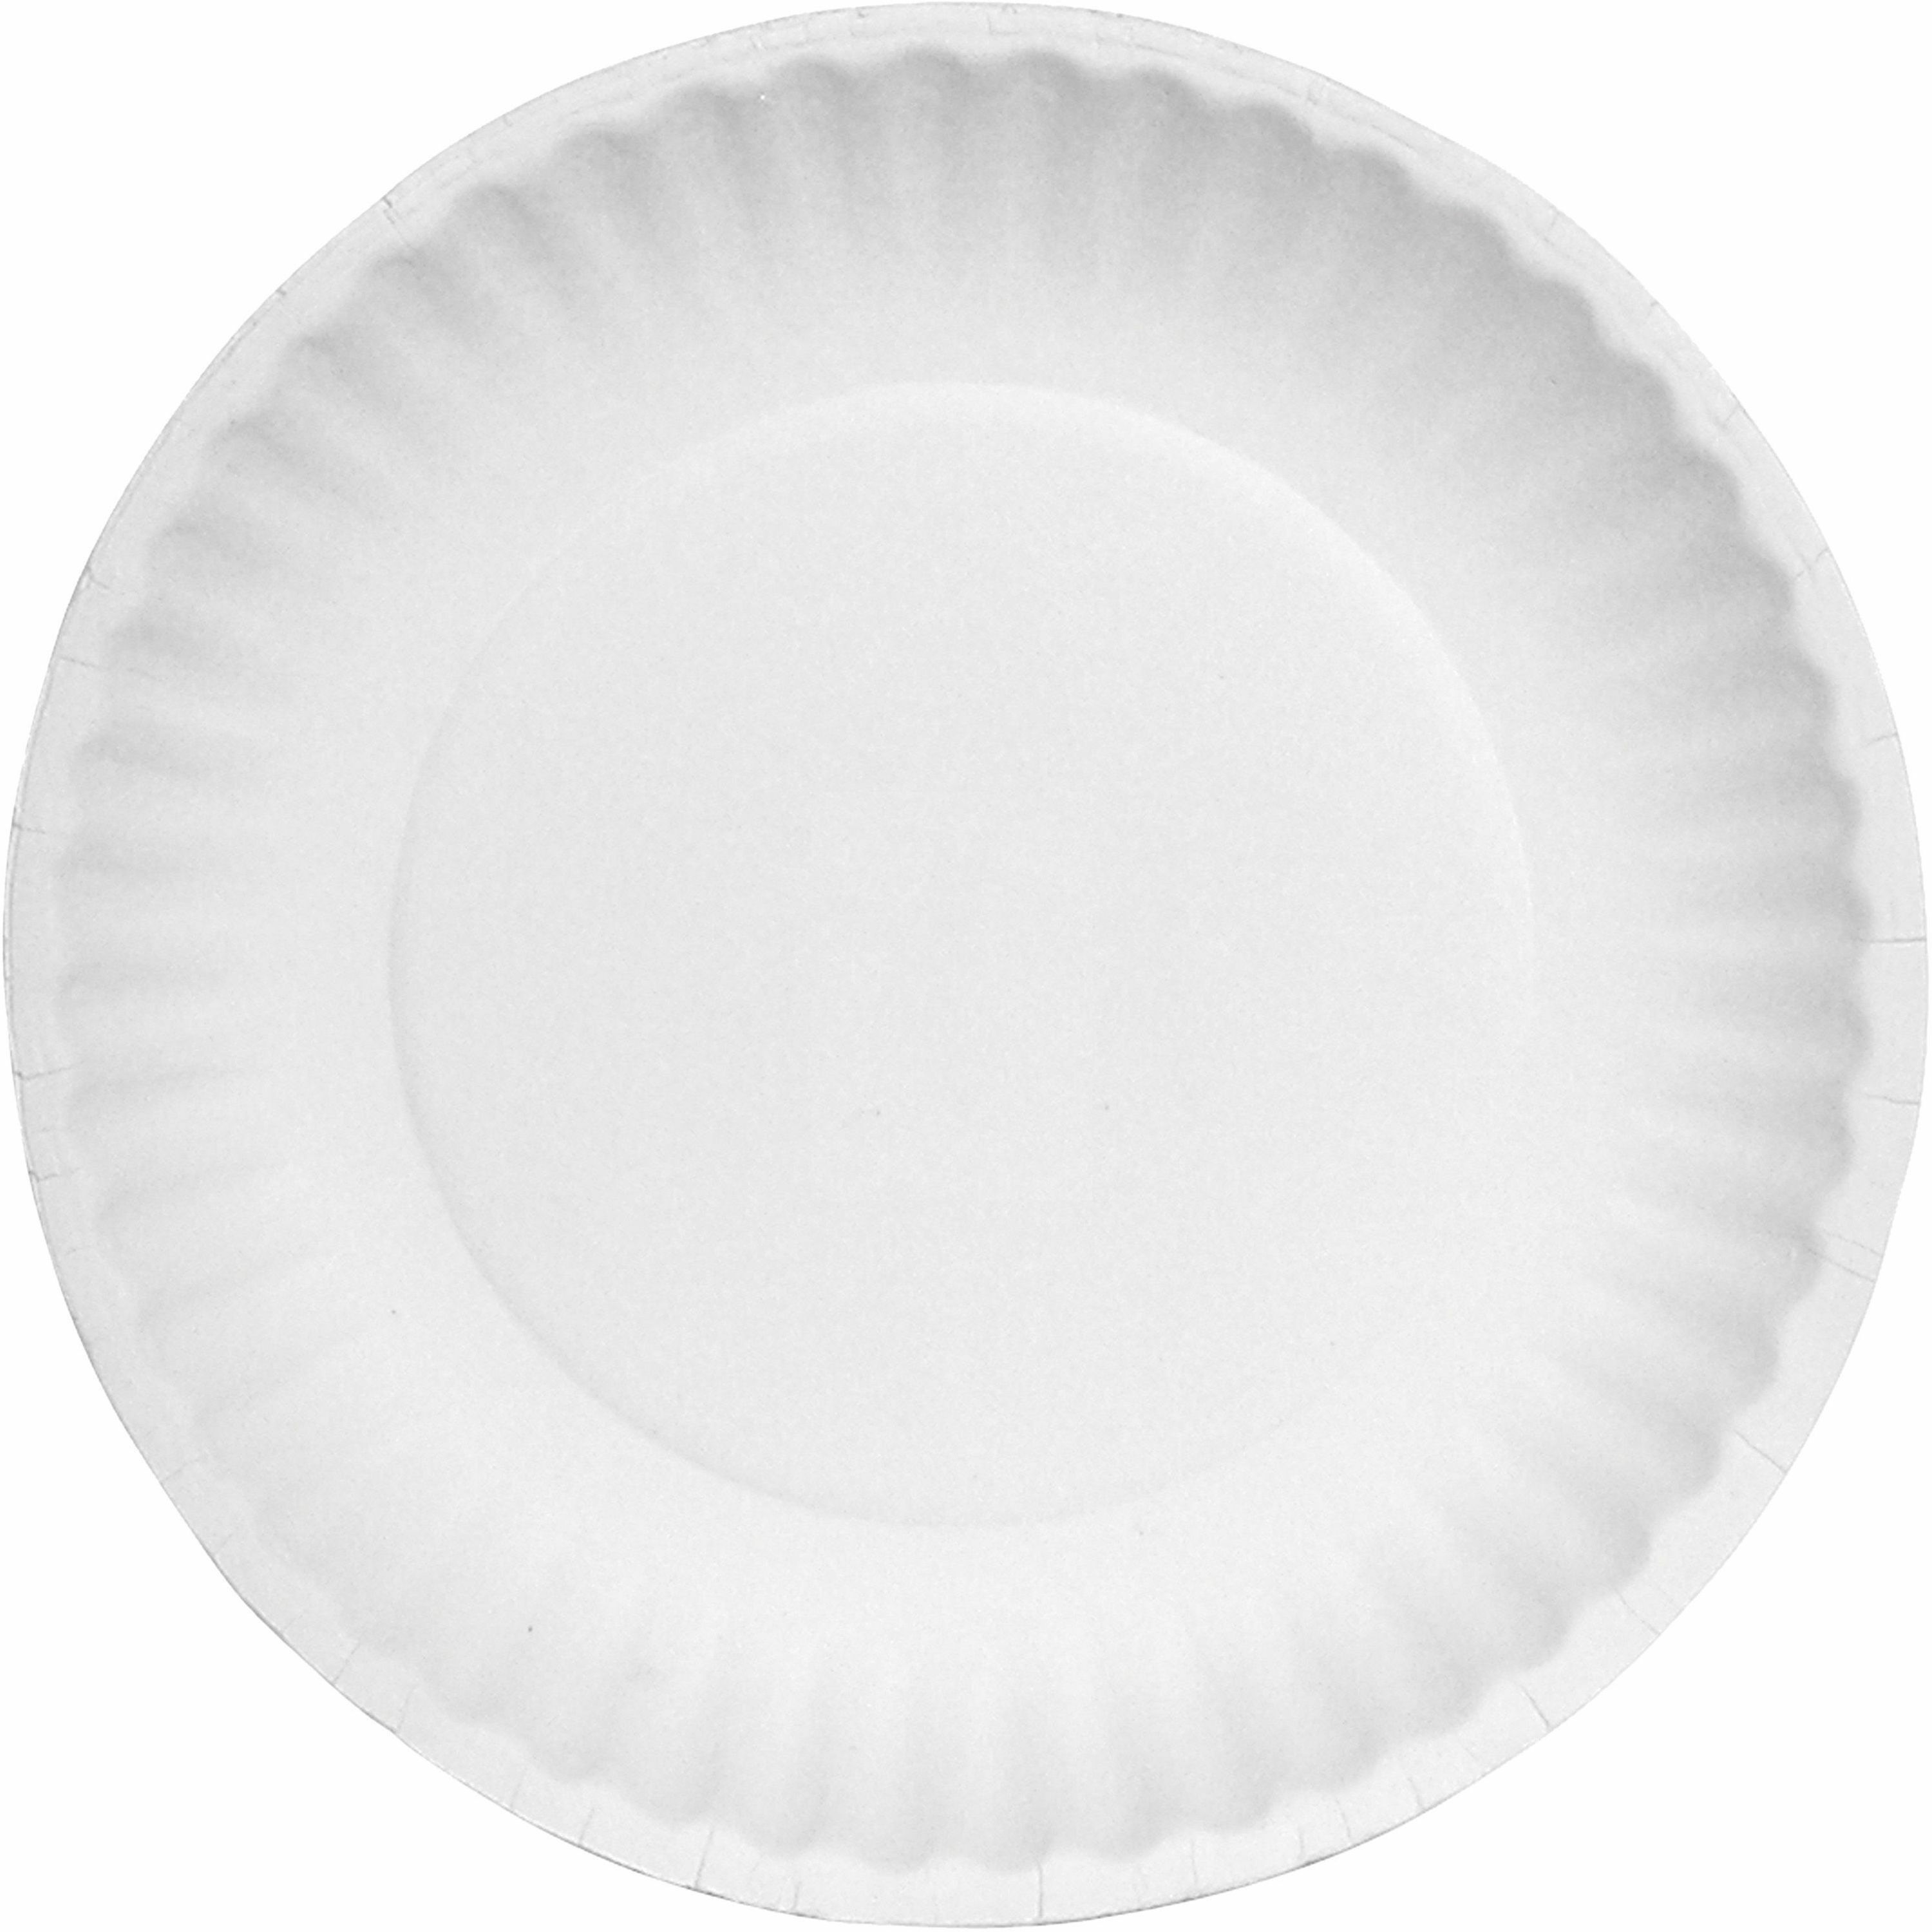 Nature's Own Green Label Paper Plates, 6 Inch - 100 plates